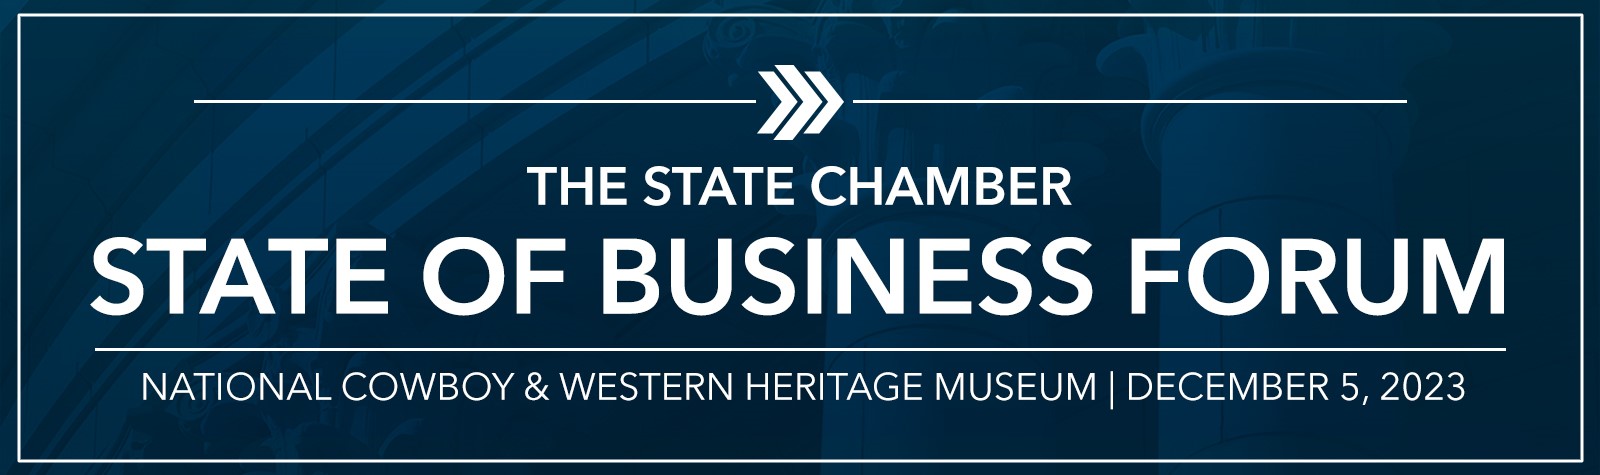 State of Business Forum | Dec. 5, 2023